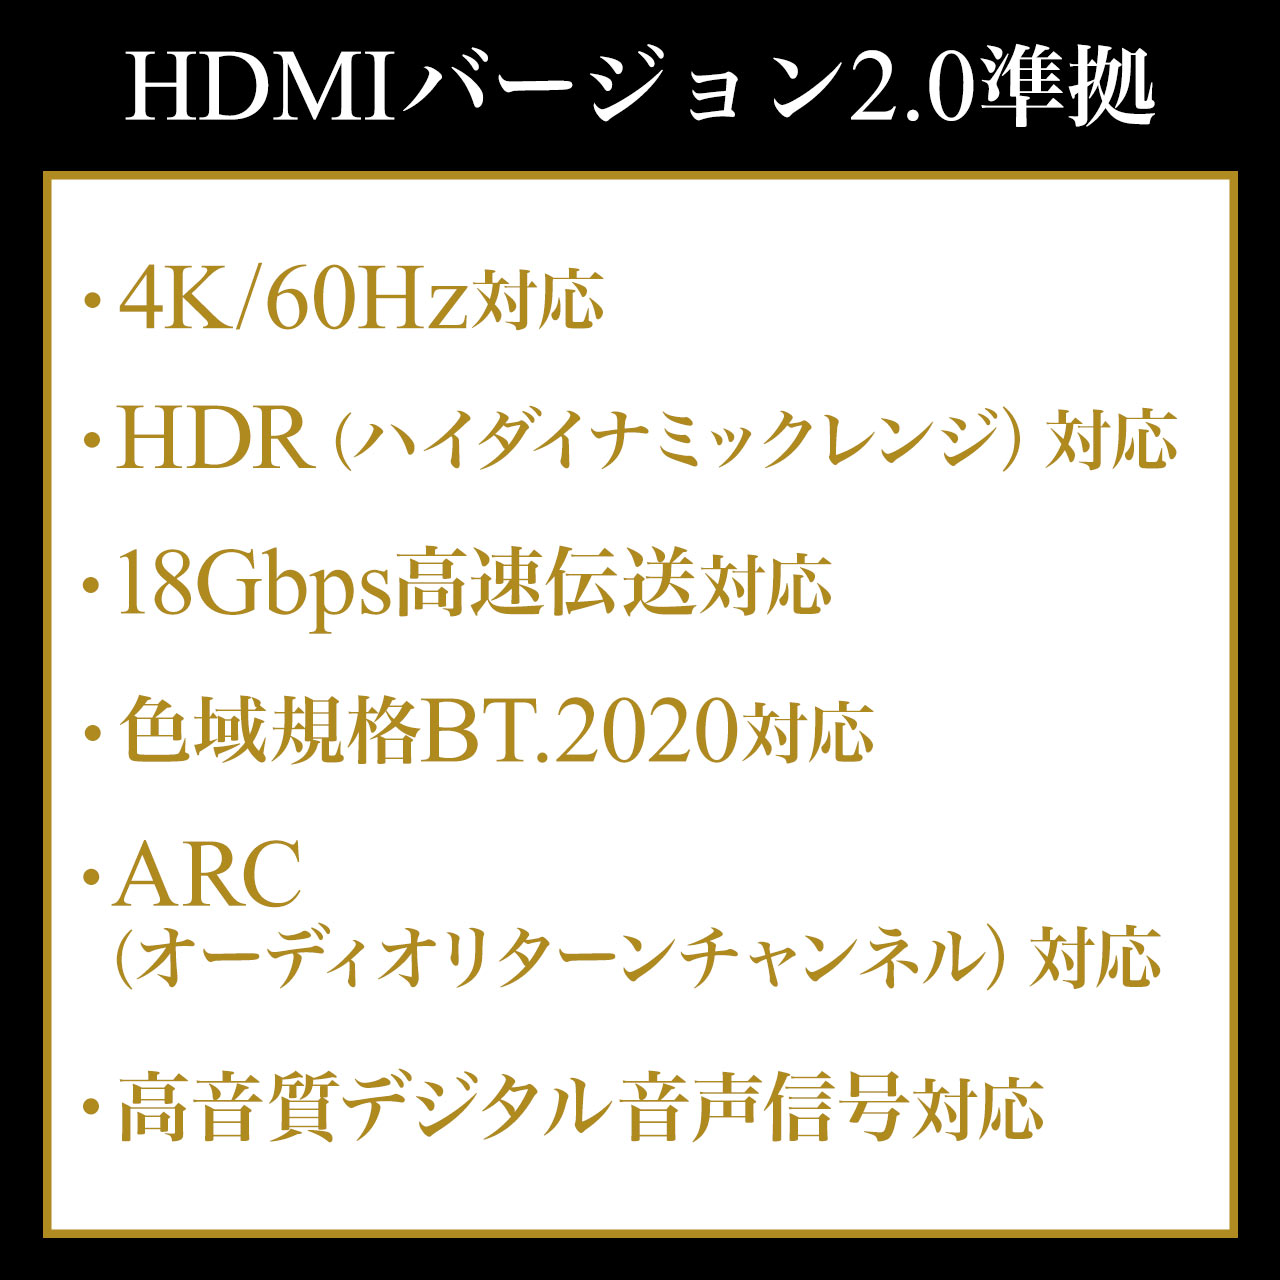 HDMIt@CoP[uiHDMIP[uE4K/60HzE18GbpsEHDRΉEo[W2.0iE30mEubNj 500-HD021-30